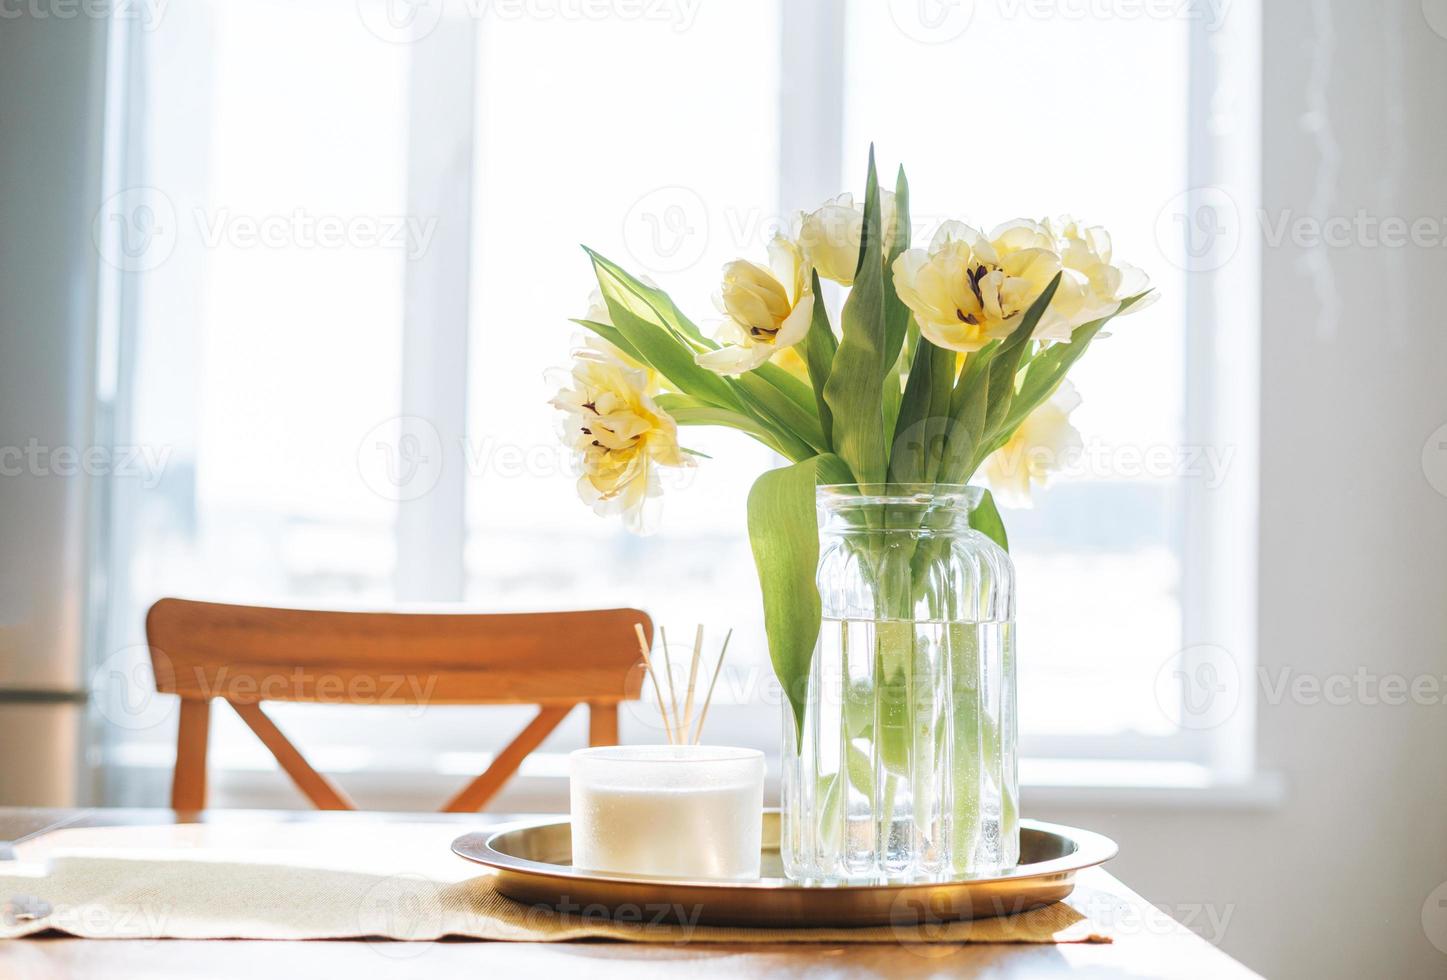 https://static.vecteezy.com/system/resources/previews/016/691/481/non_2x/beautiful-bouquet-of-yellow-tulips-in-vase-on-dinner-table-in-white-kitchen-light-interior-at-home-photo.jpg